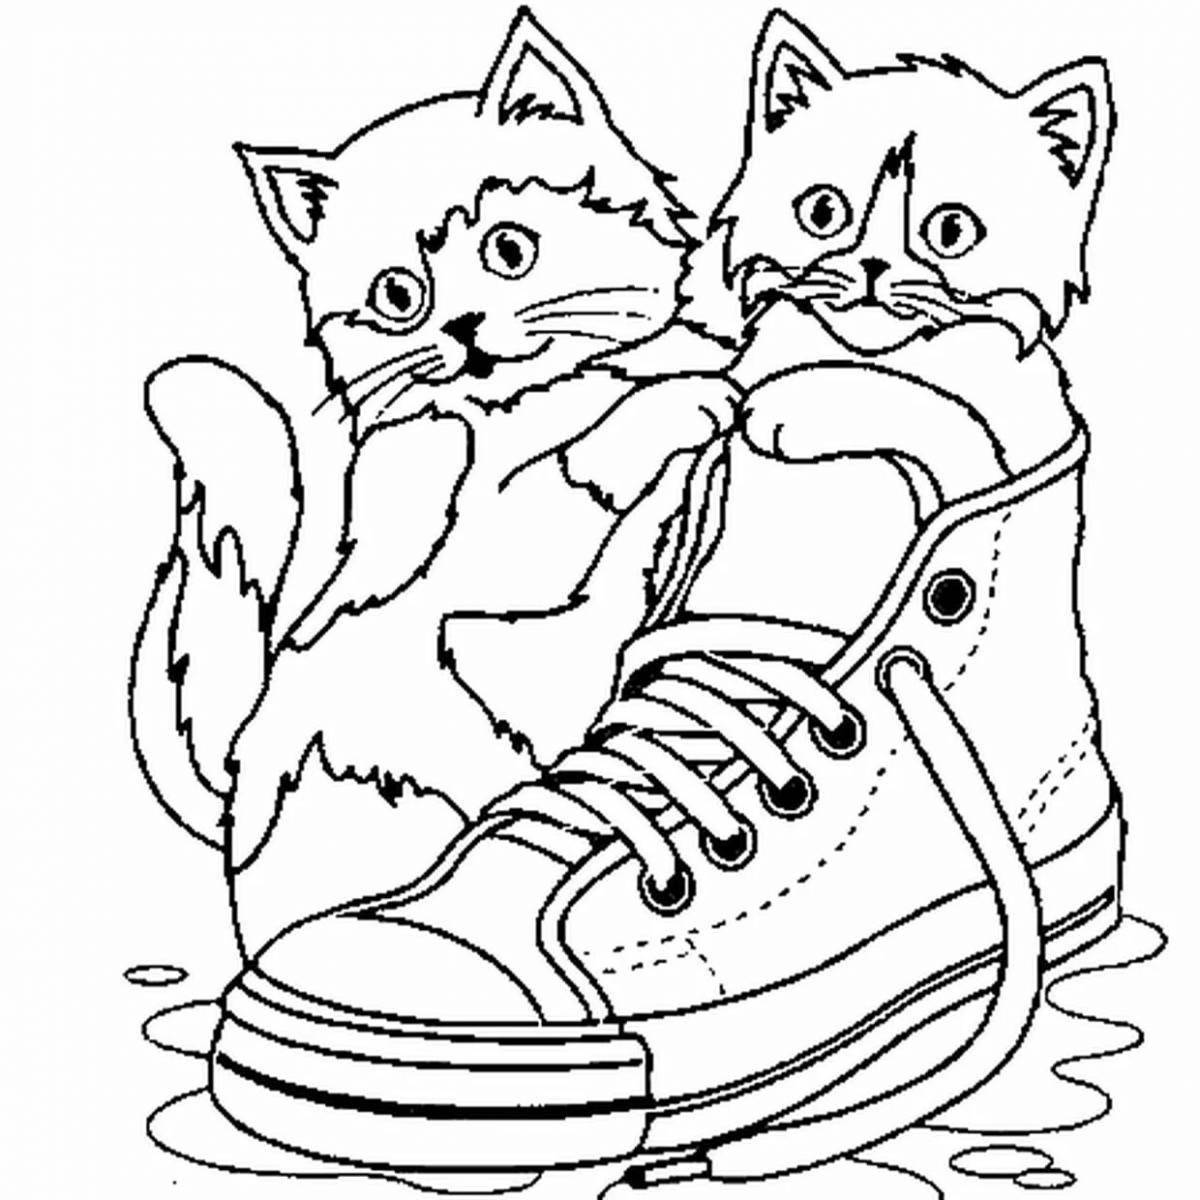 Fun coloring book for girls with animals